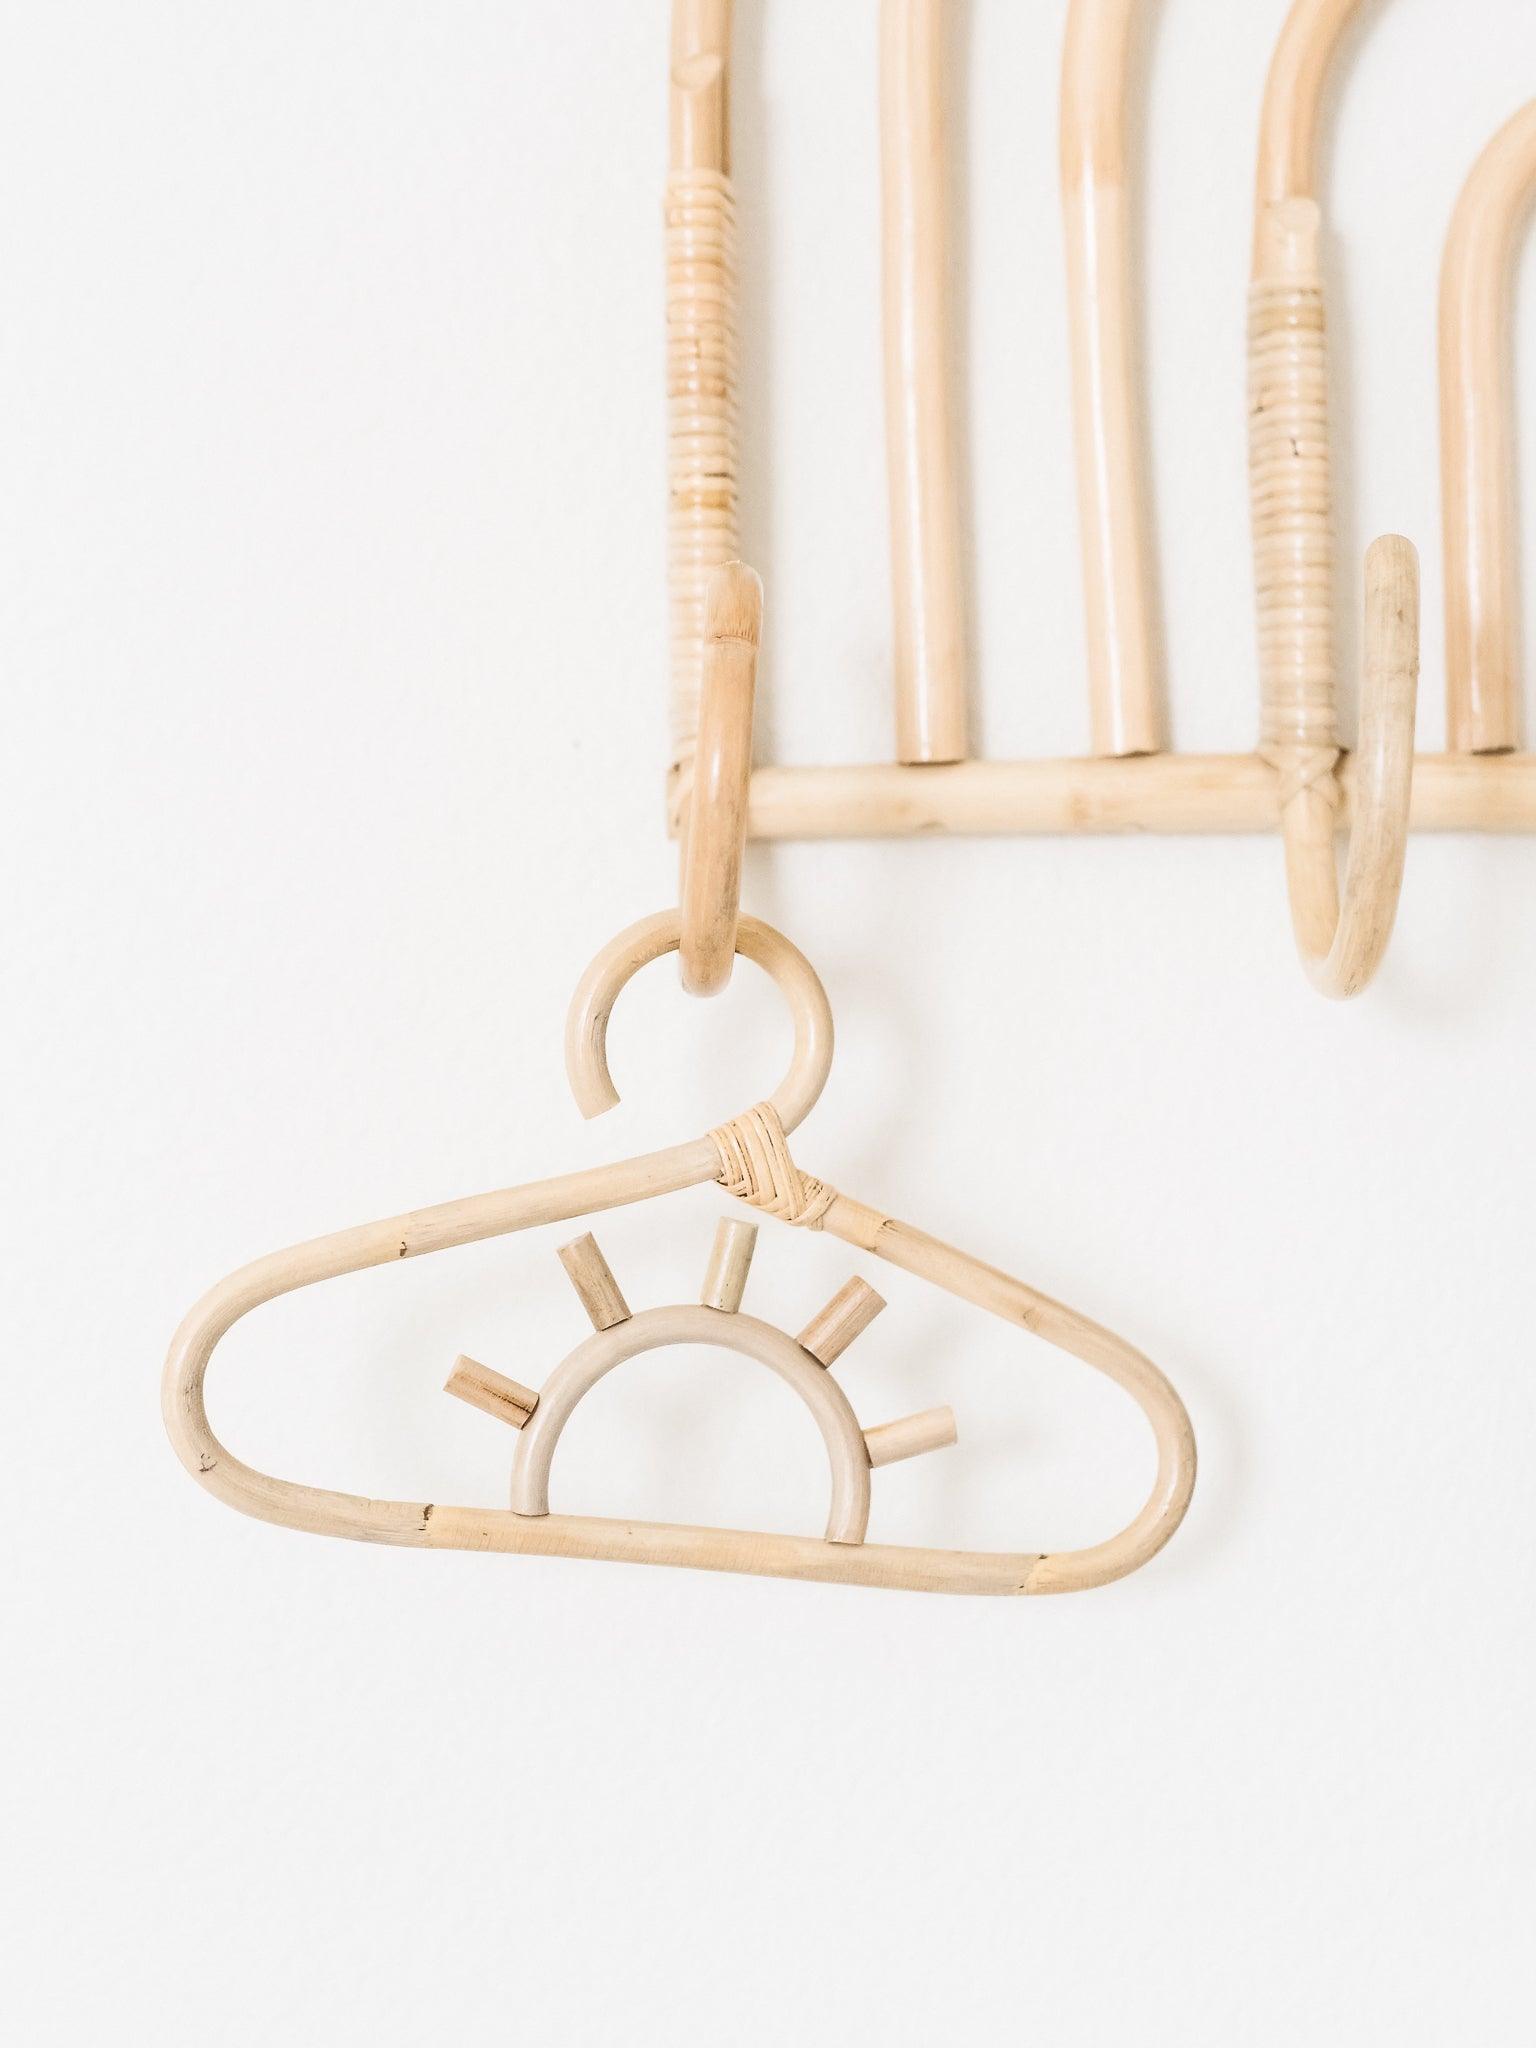 Sunny Rattan Childrens Hangers - Why and Whale